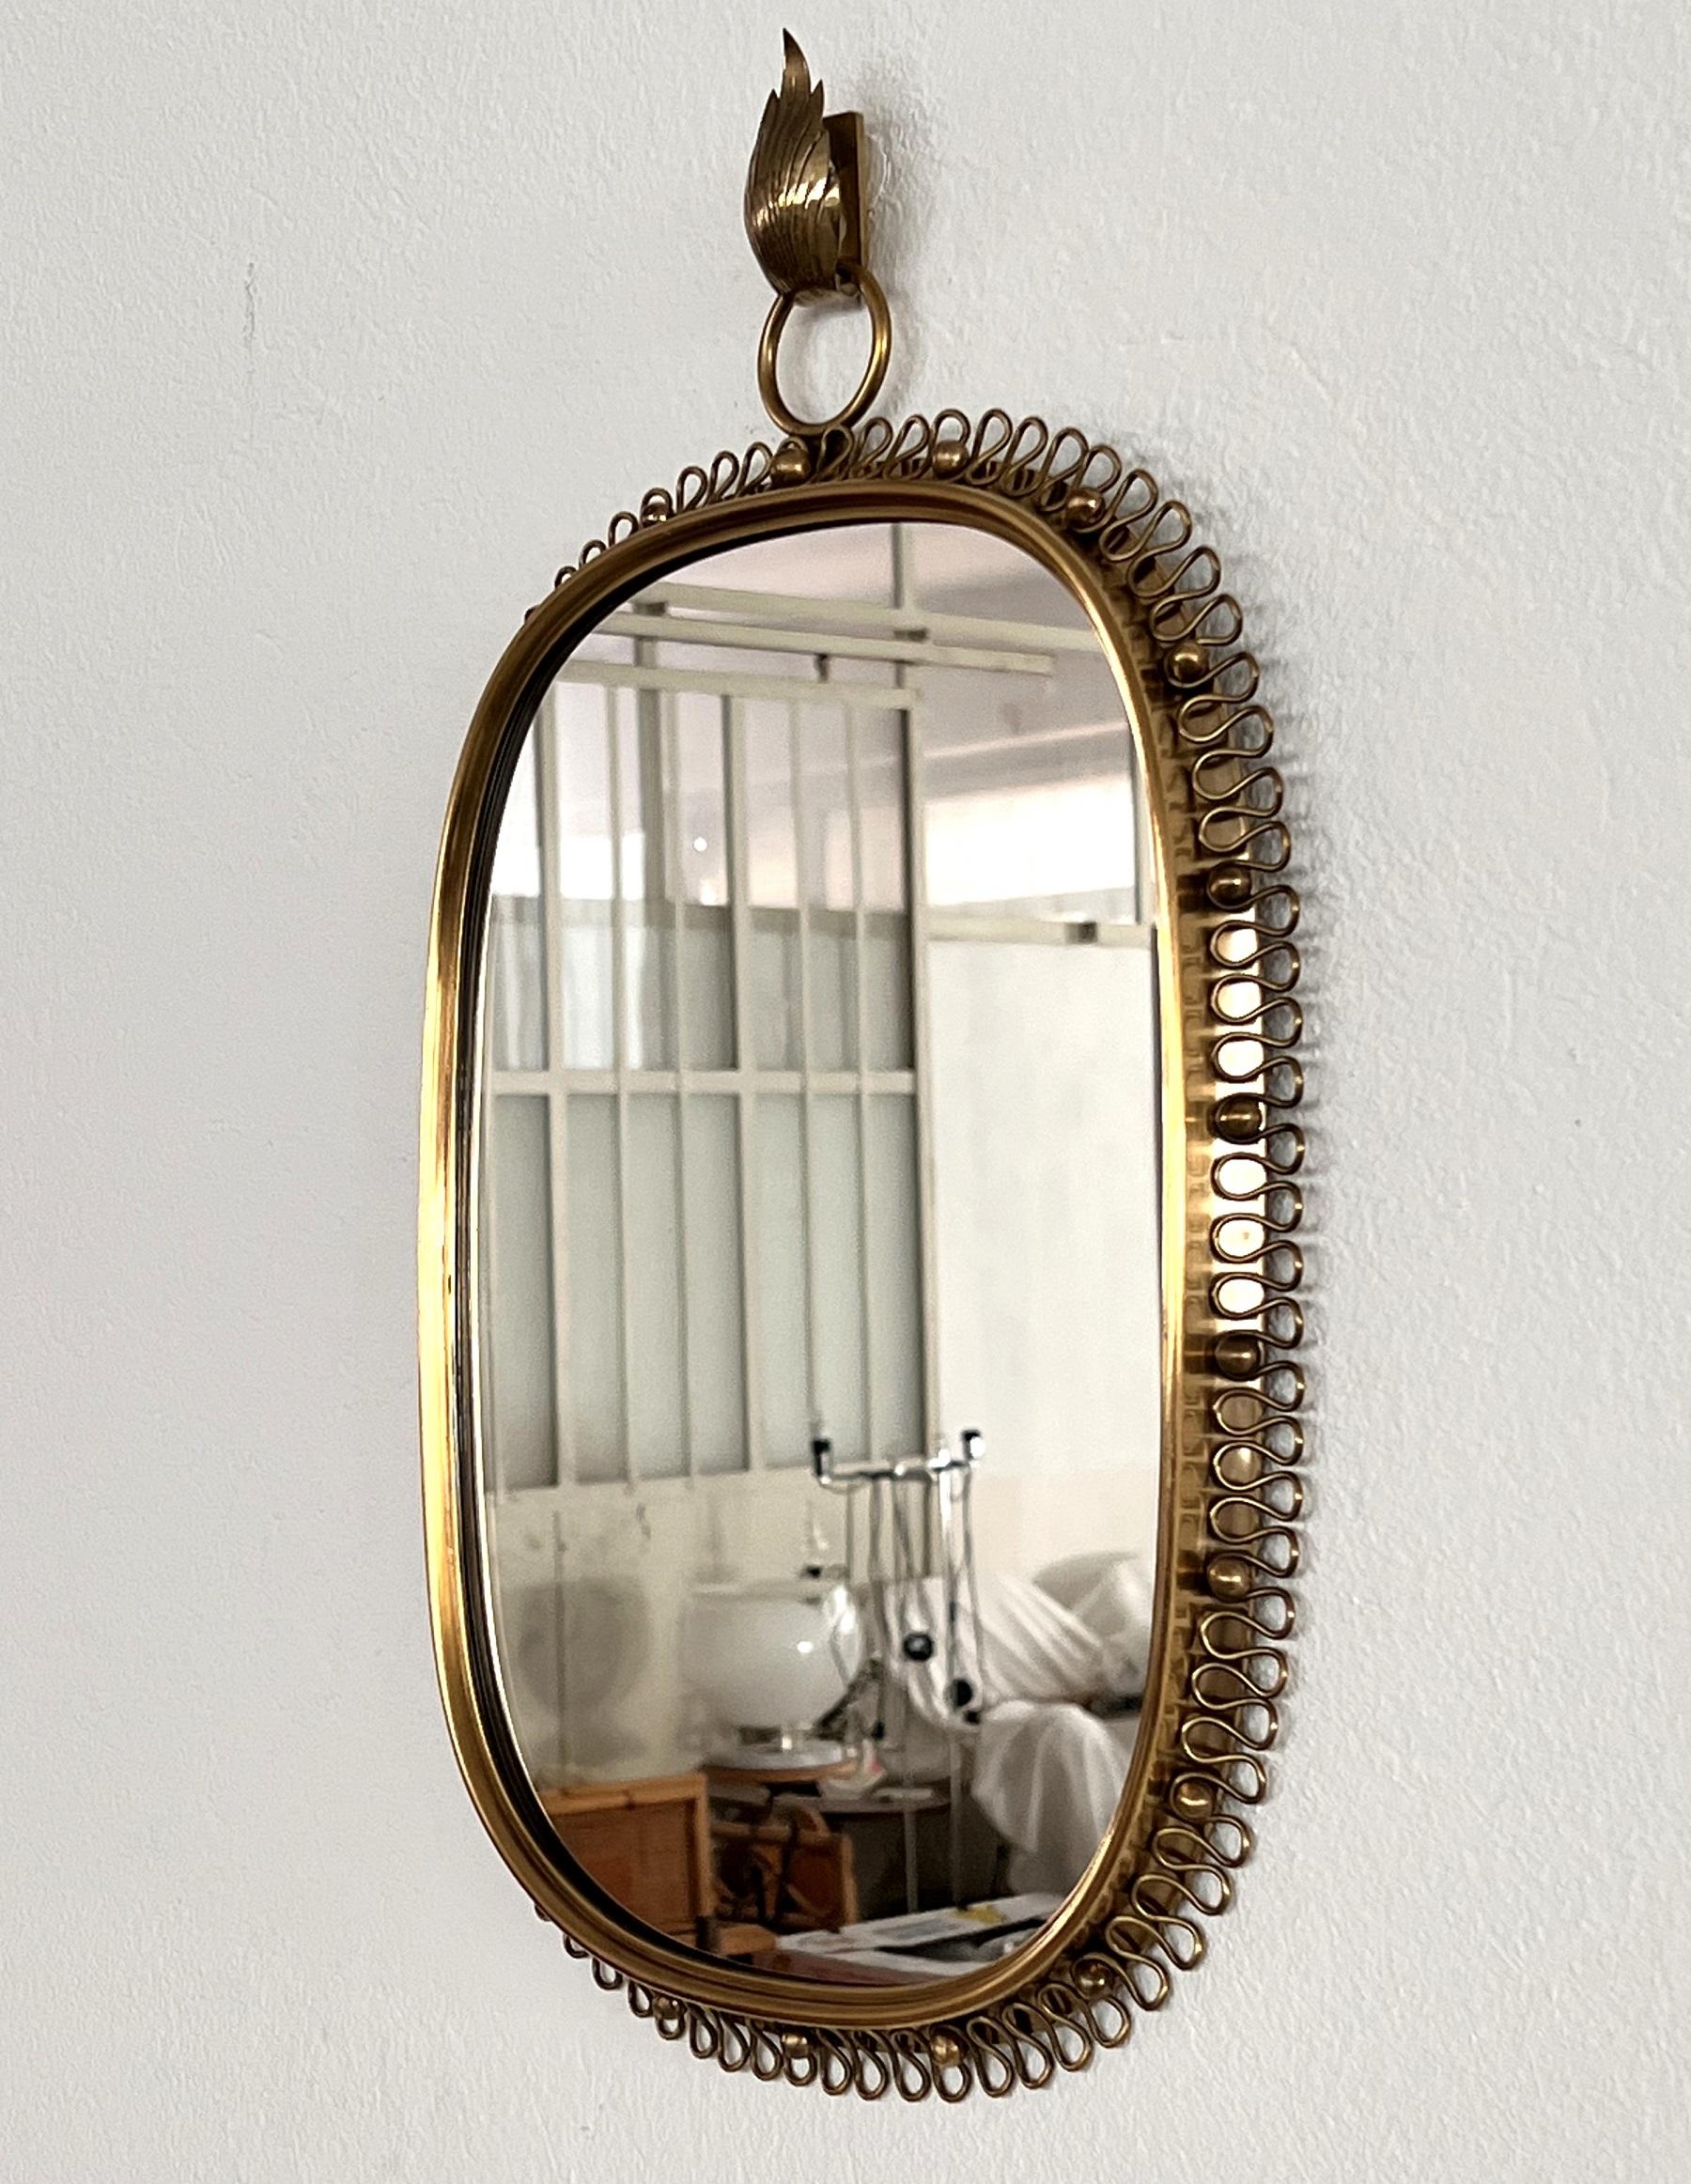 Gorgeous wall mirror with its proper wall hook designed by Austrian Josef Frank and manufactured in Sweden by Svensk Tenn in the midcentury.
This mirror is made of full brass frame with spiral loop frame around and big round hanging loop on top.
You